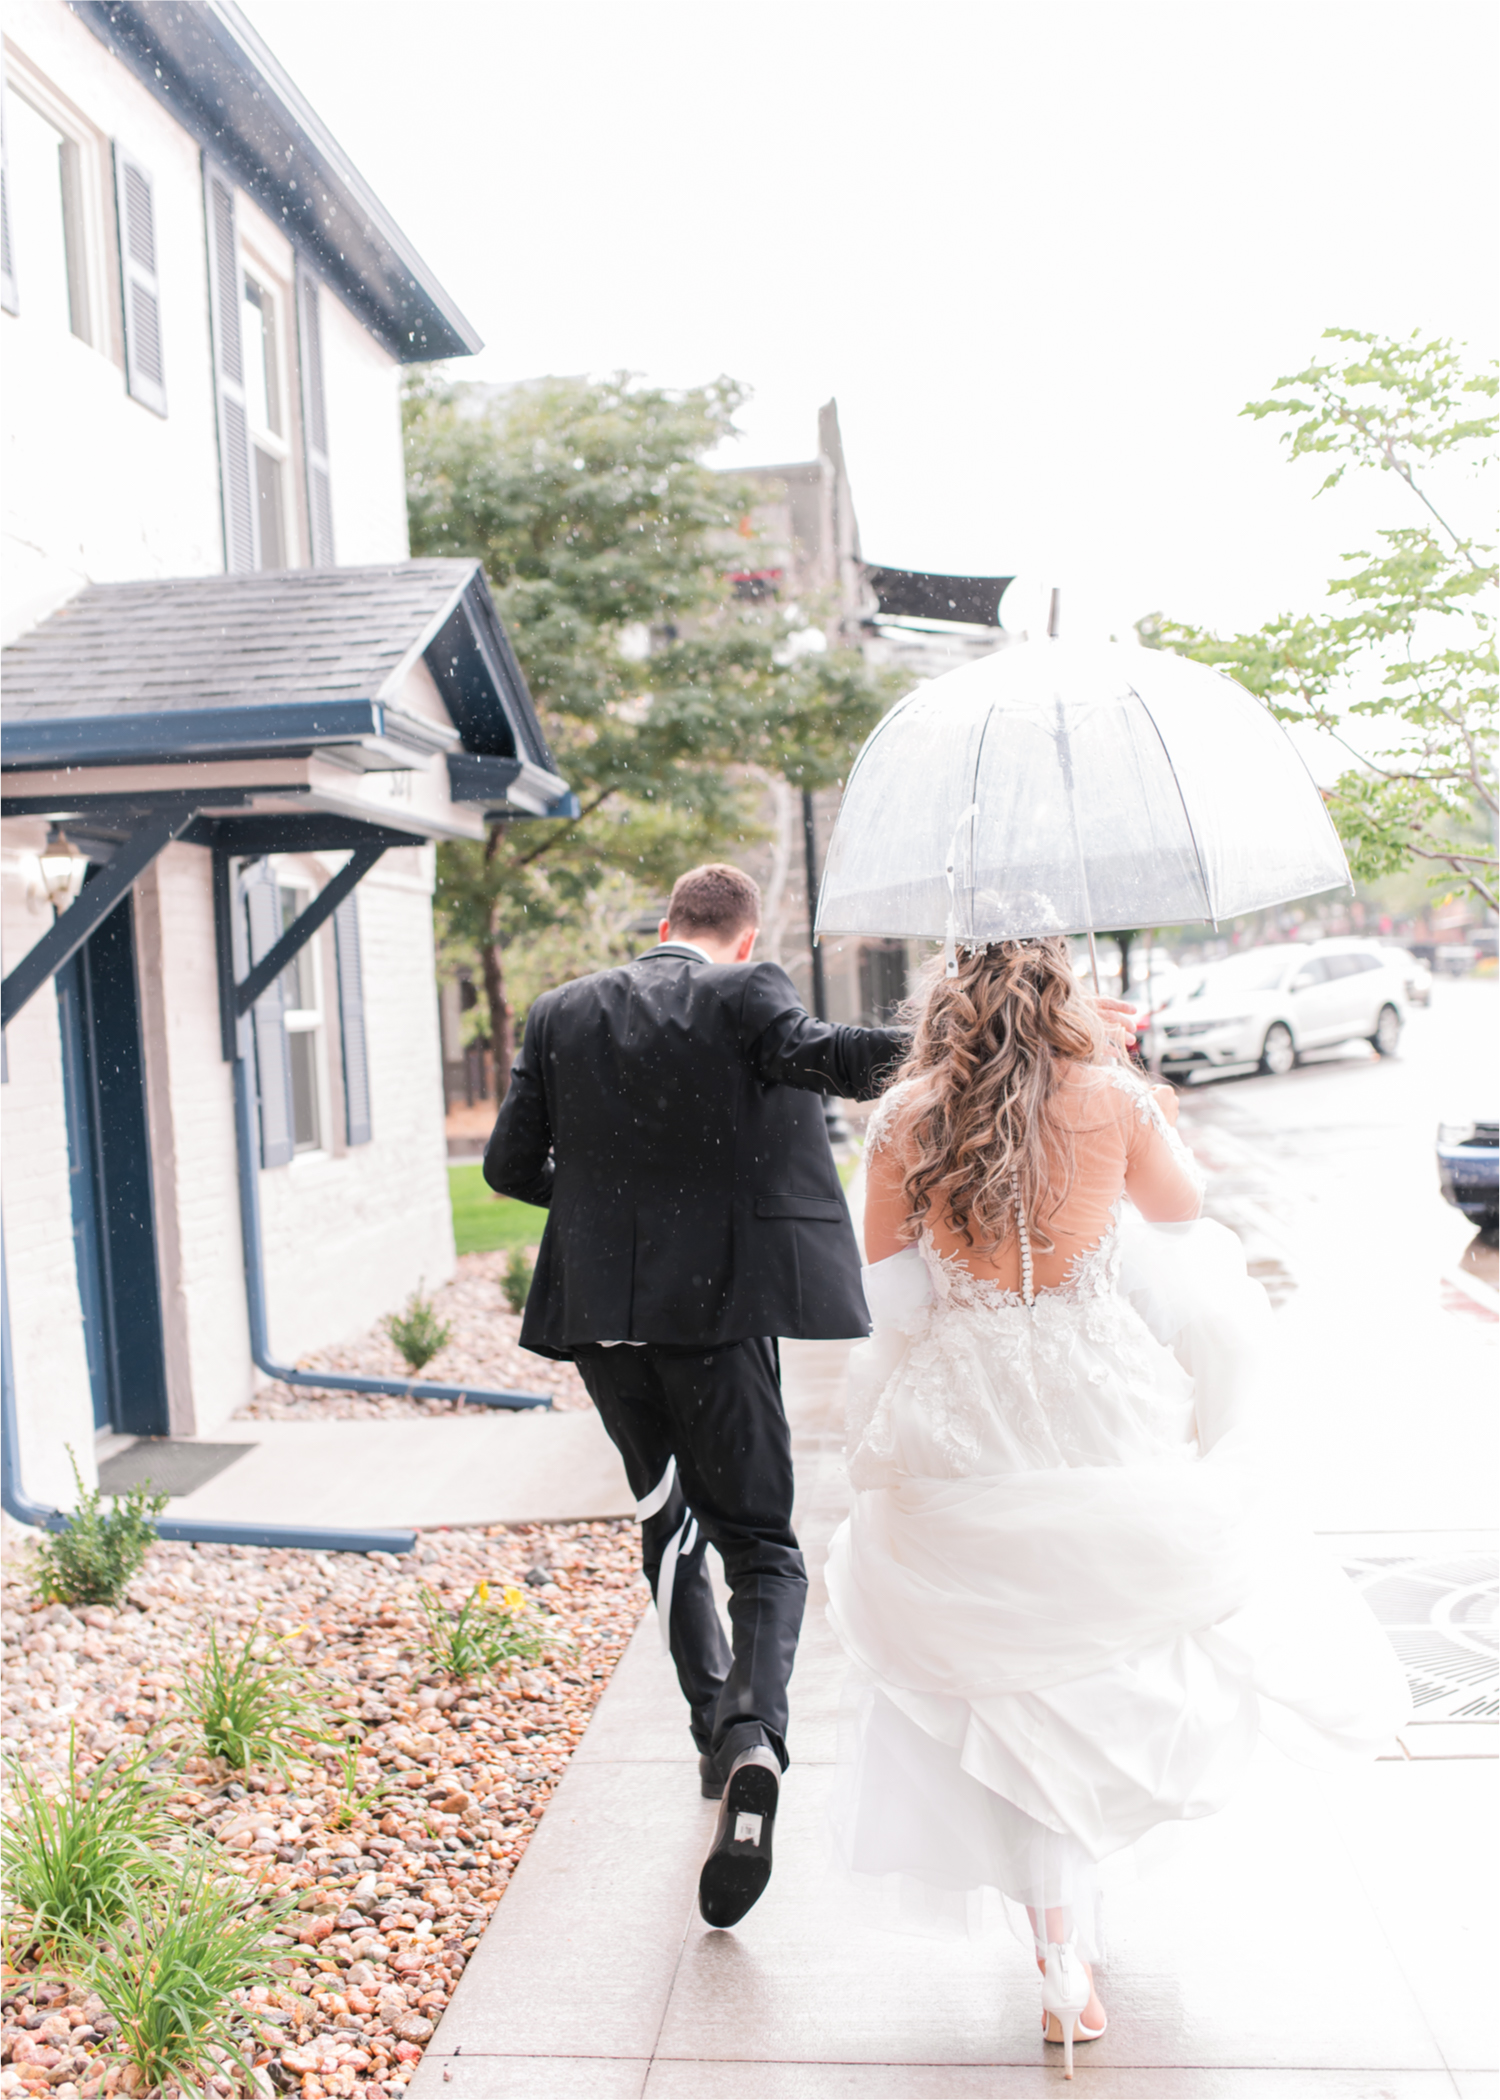 Romantic and Rustic Wedding at The Mill in Windsor | Britni Girard Photography | Colorado based wedding photography and videography team | Bride and groom in rain